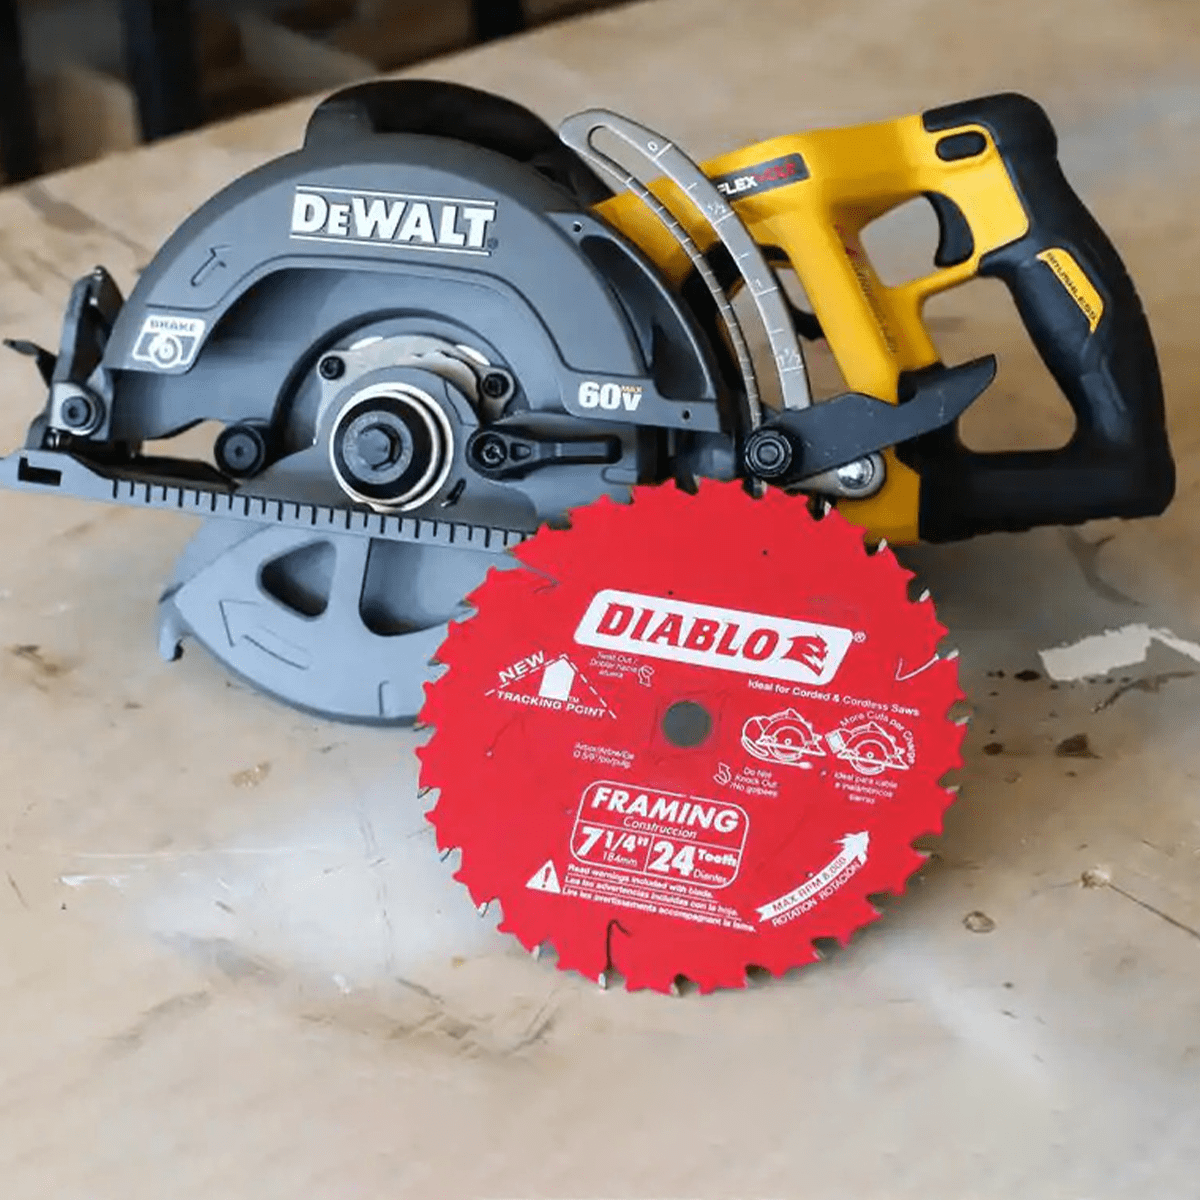 what is the best circular saw blade?